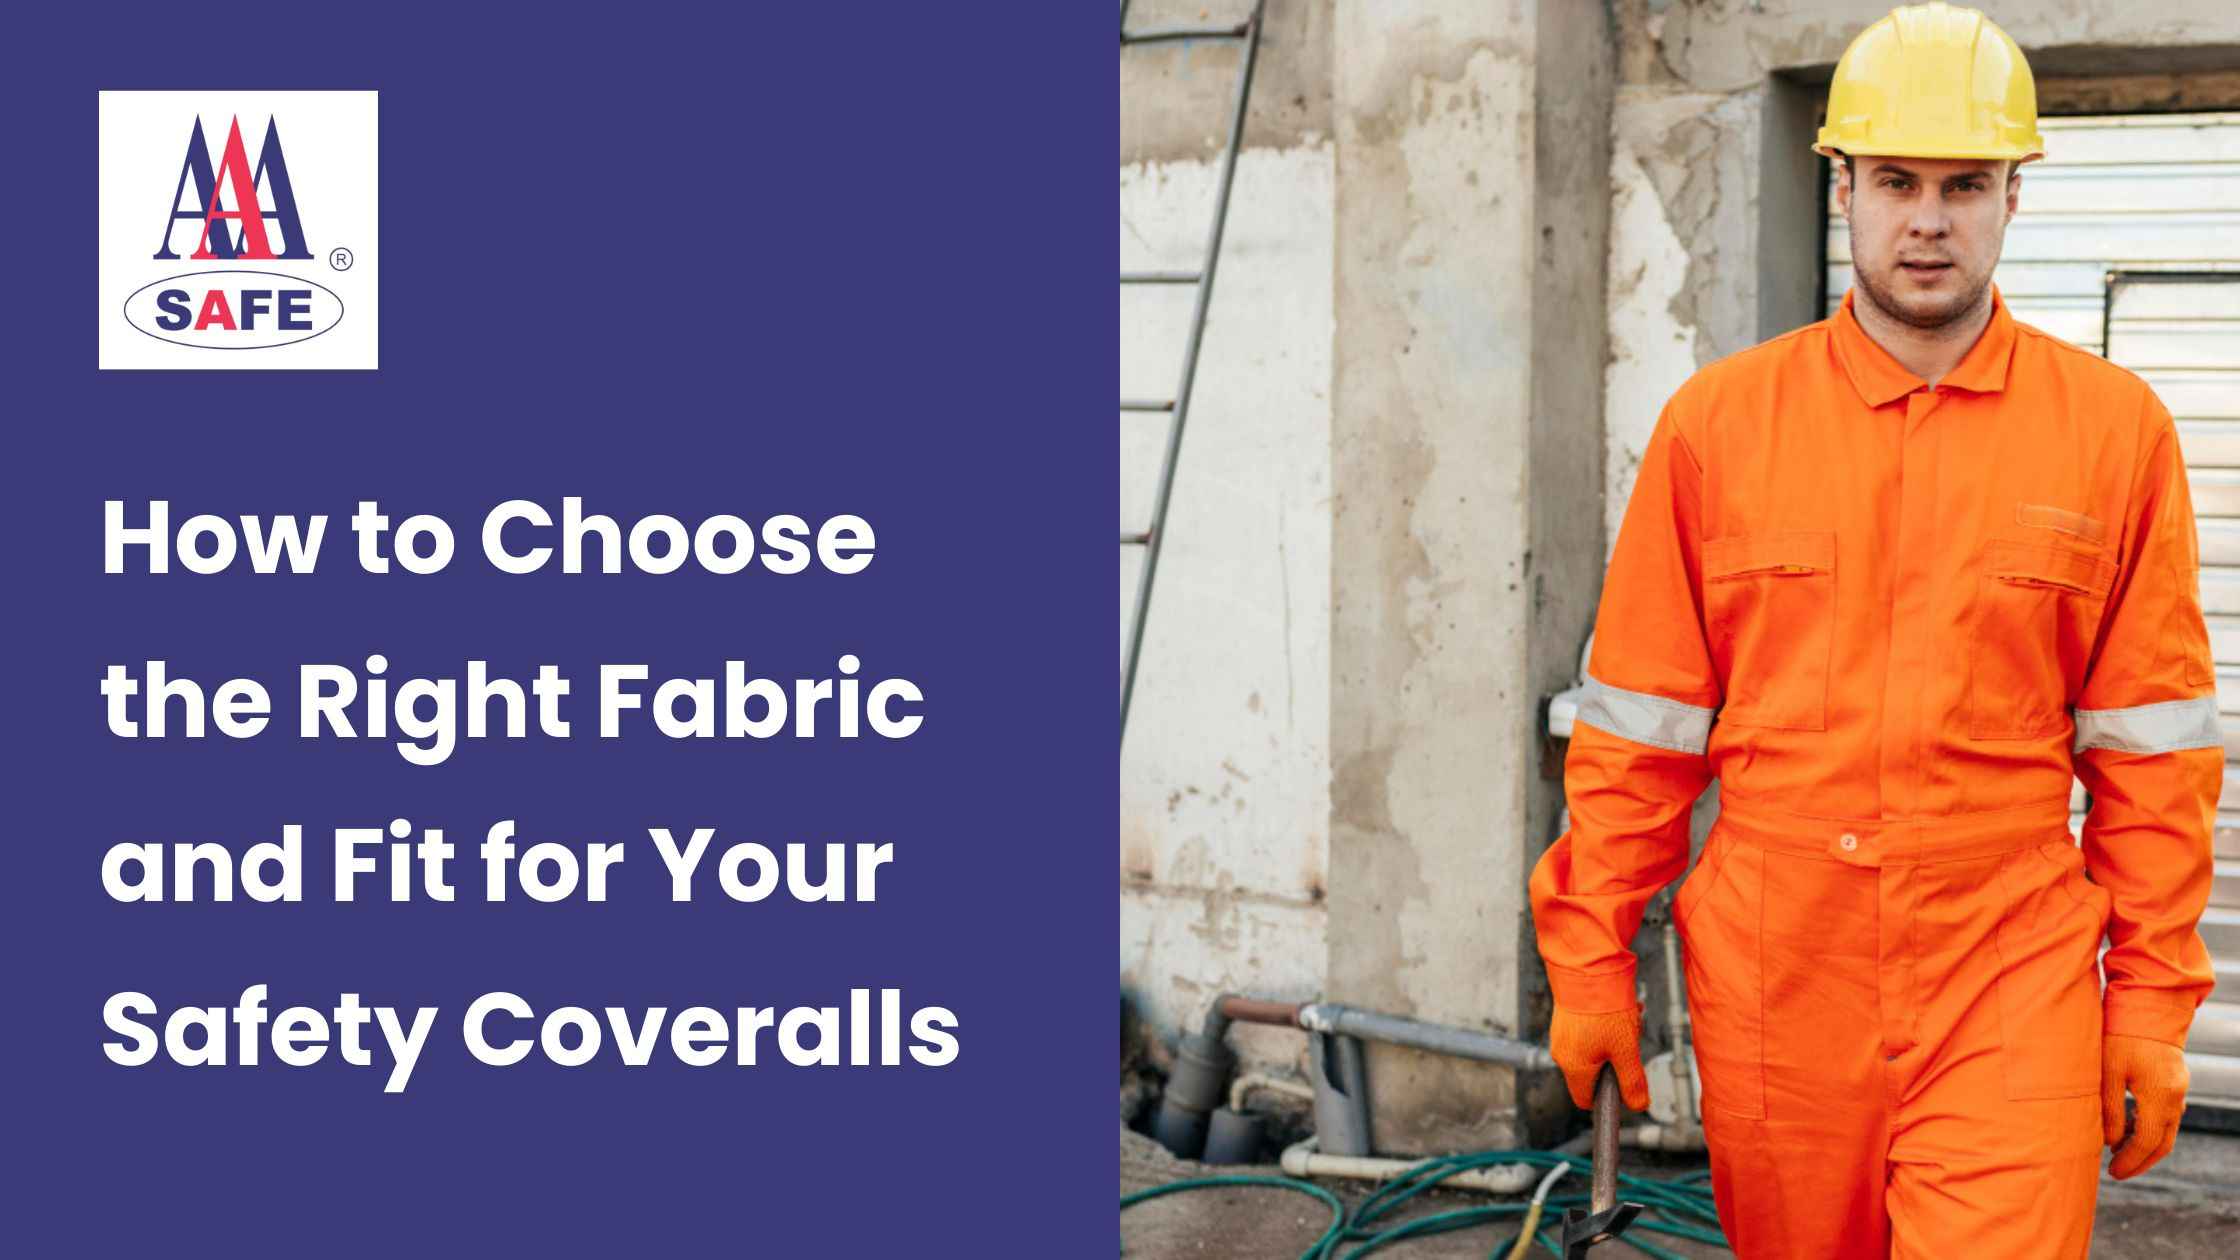 How to Choose the Right Fabric and Fit for Your Safety Coveralls